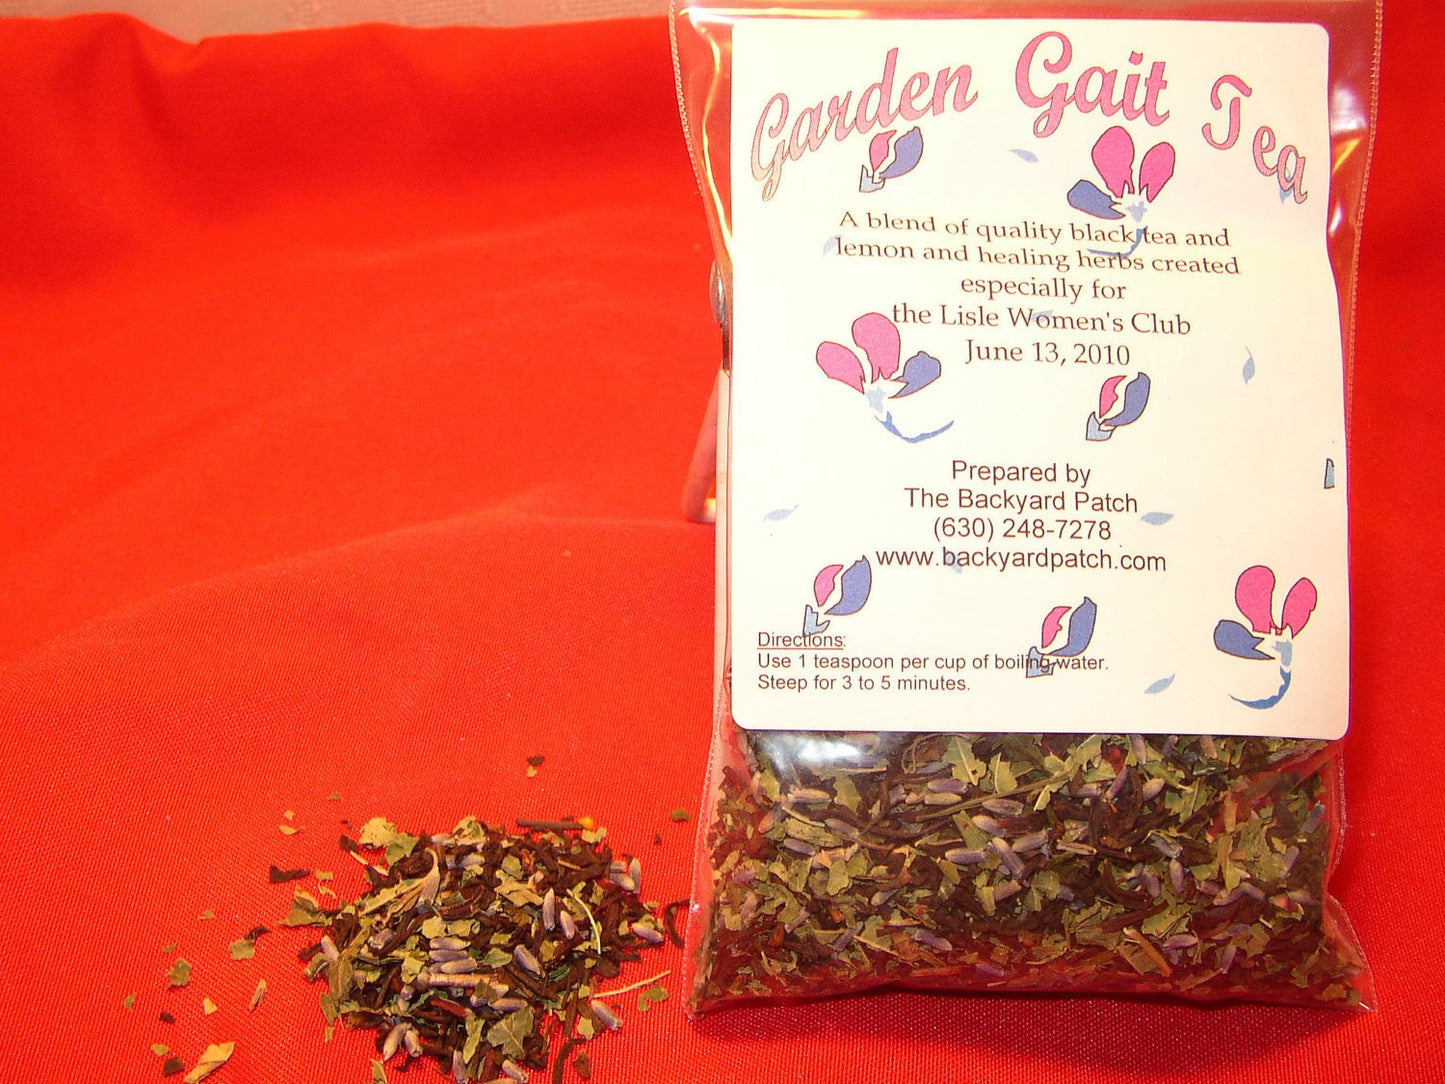 Custom Designed, hand-blended Herbal Tea for Mothers, Friends, and Tea Lovers